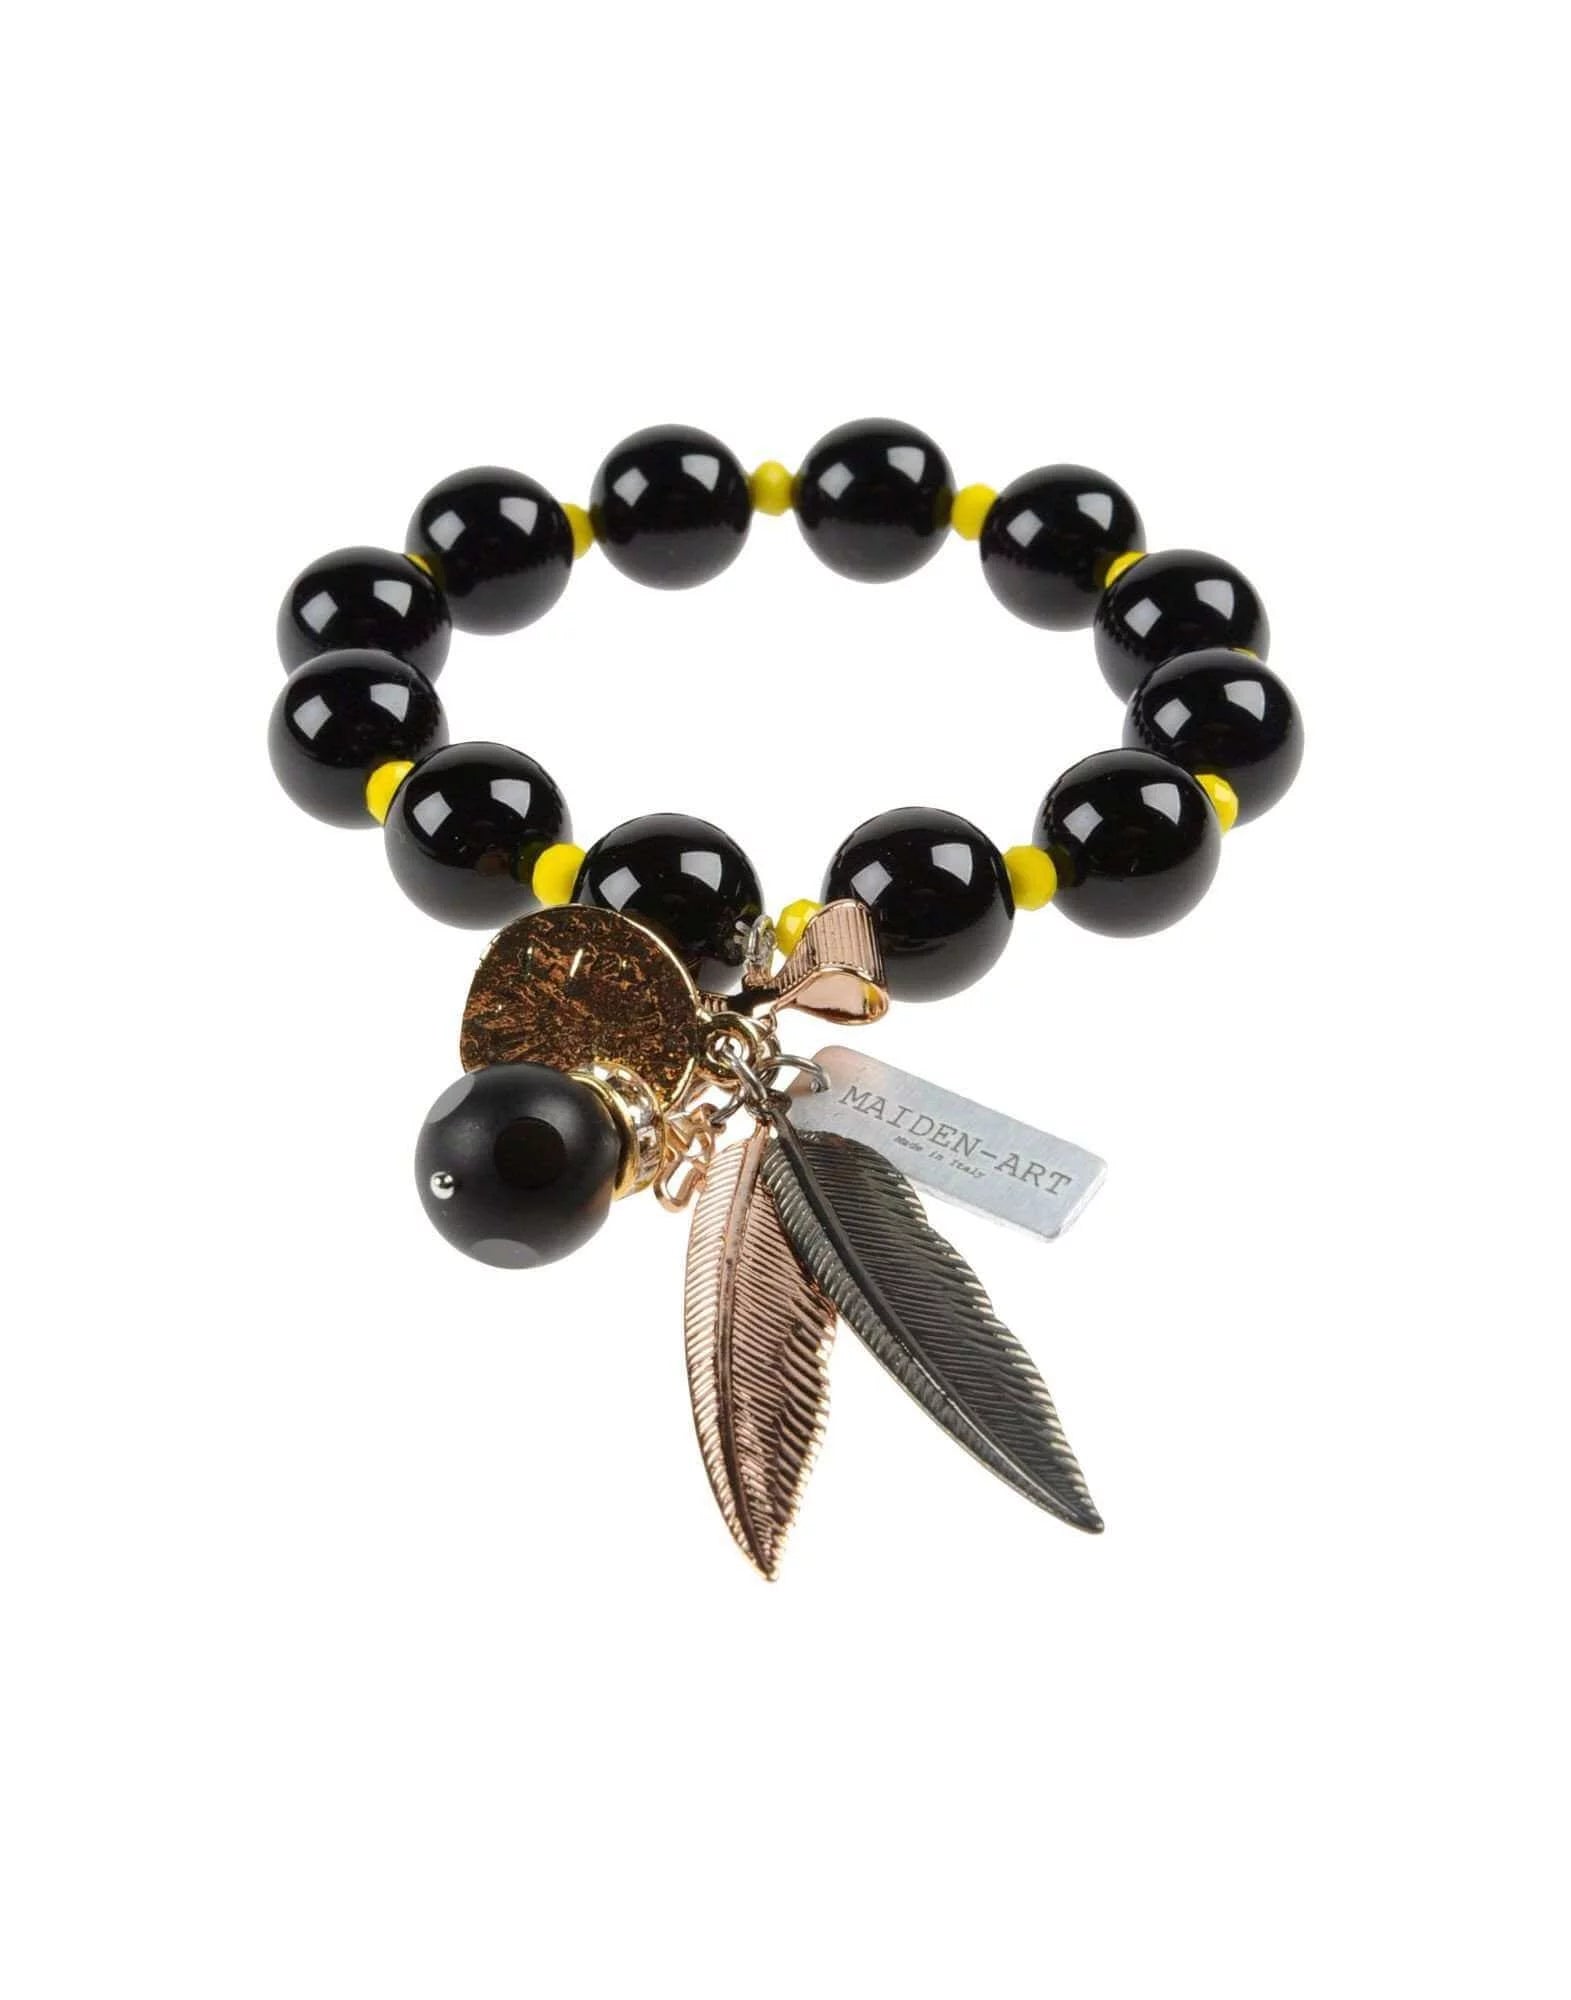 Stylish charm bracelet with black onyx and charms - Maiden-Art